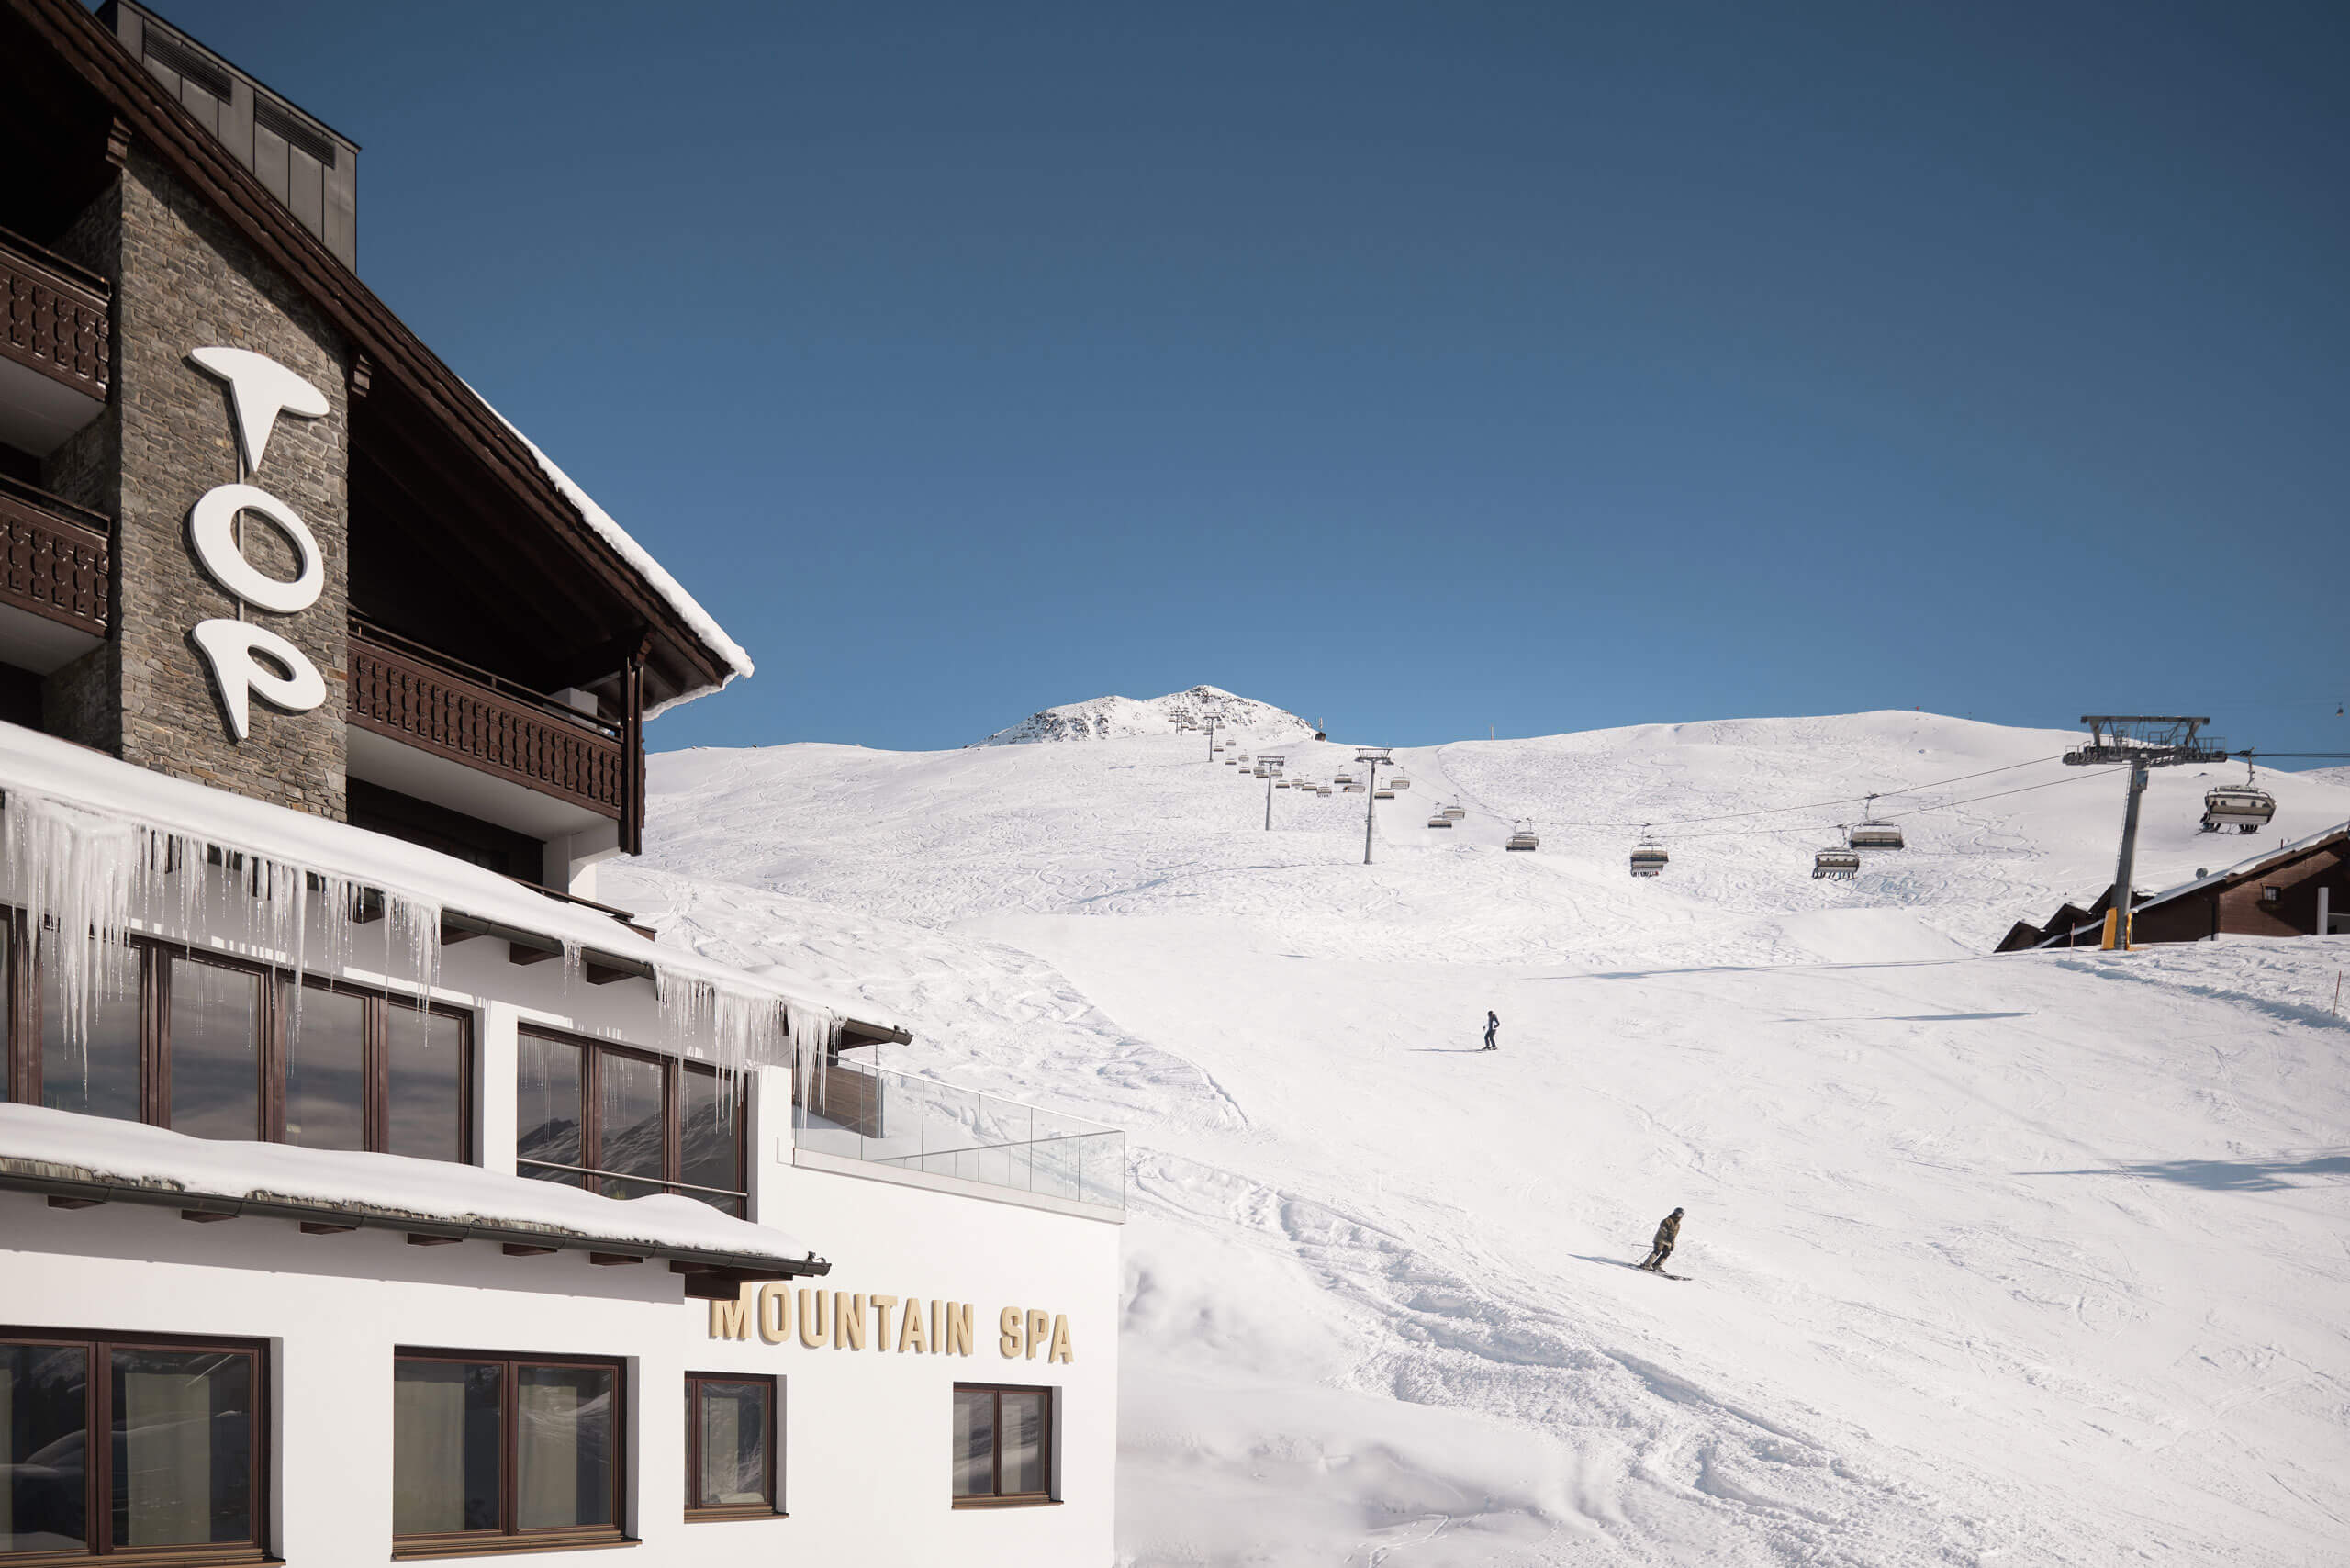 A building with a ski lift and a snow-covered mountain